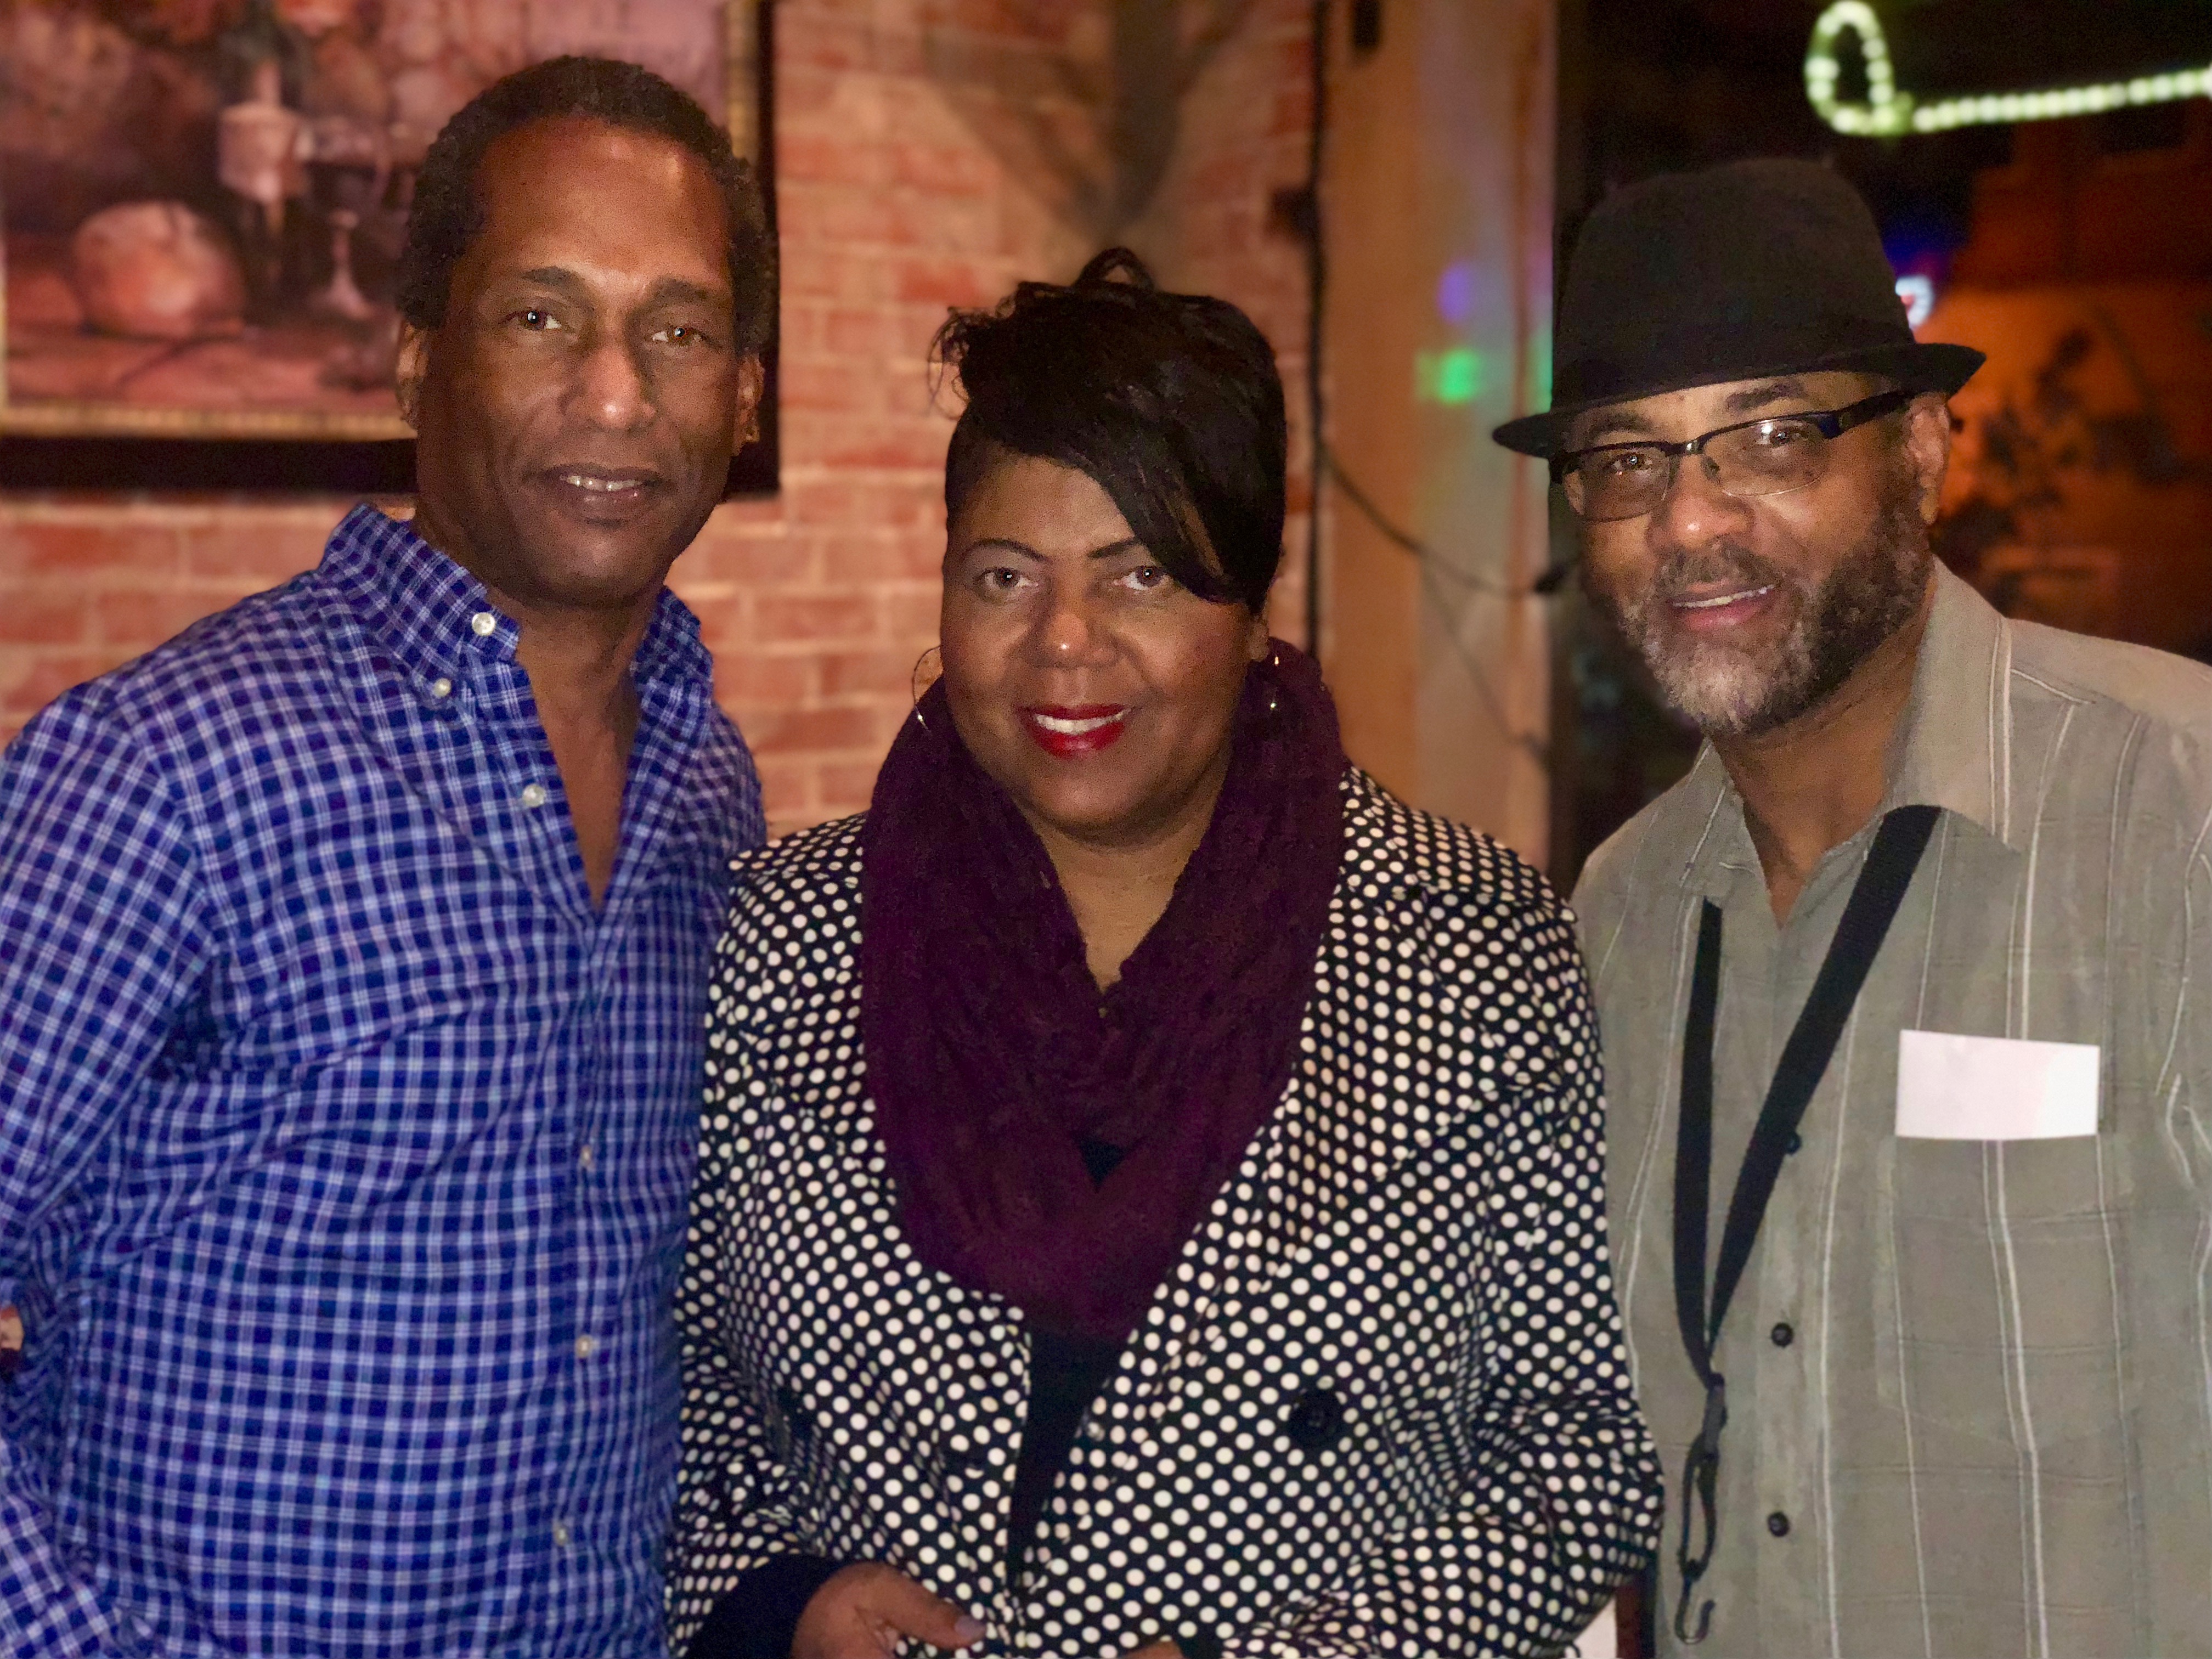 With keyboardist Norman Williams and saxophonist Fulton Turnage